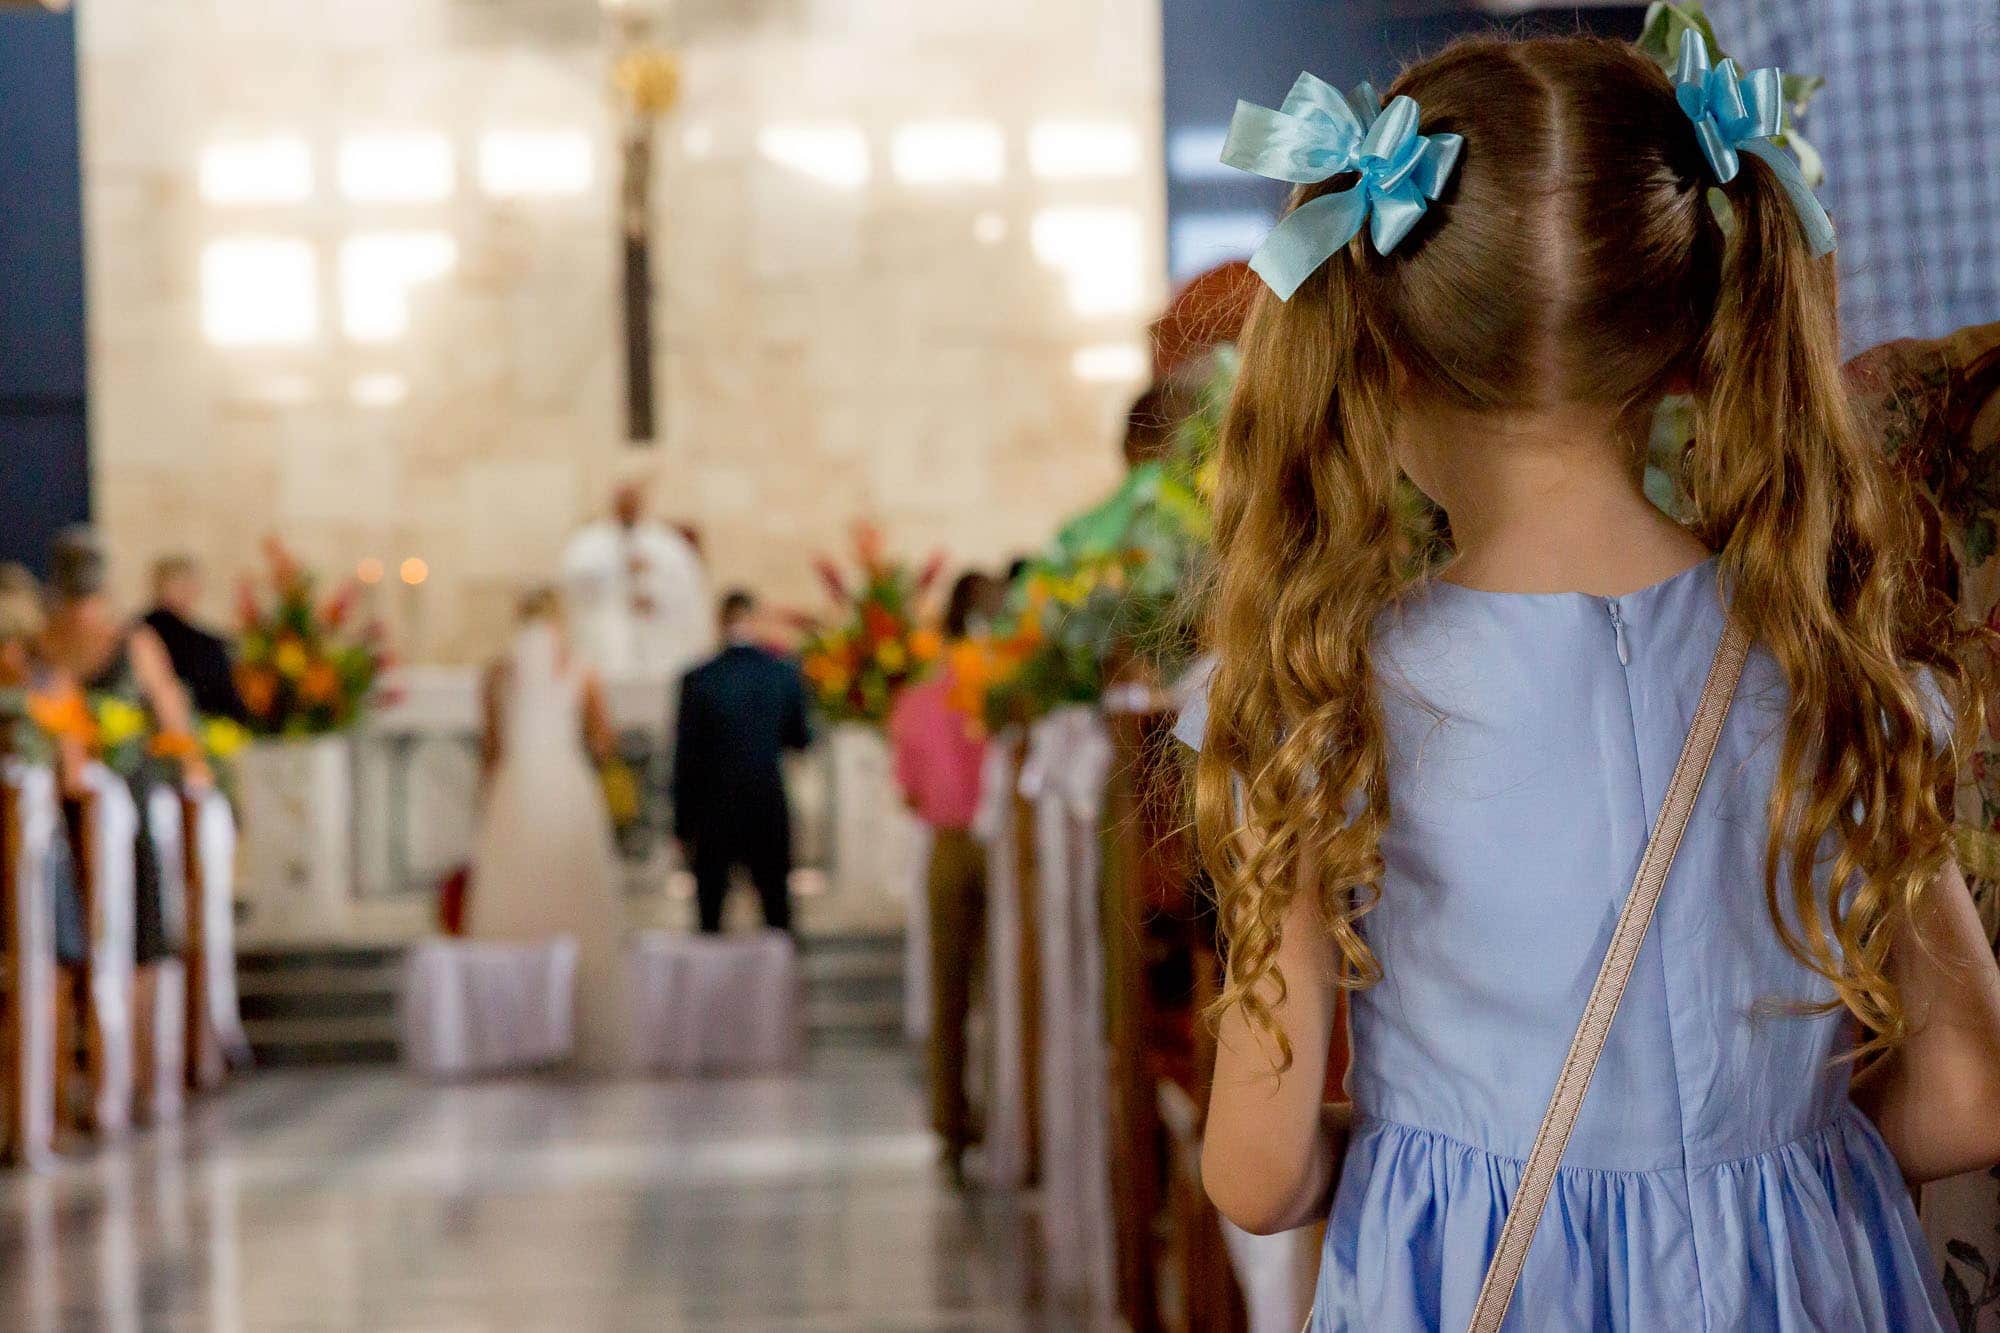 Little girl stands attentively watching the church wedding ceremony